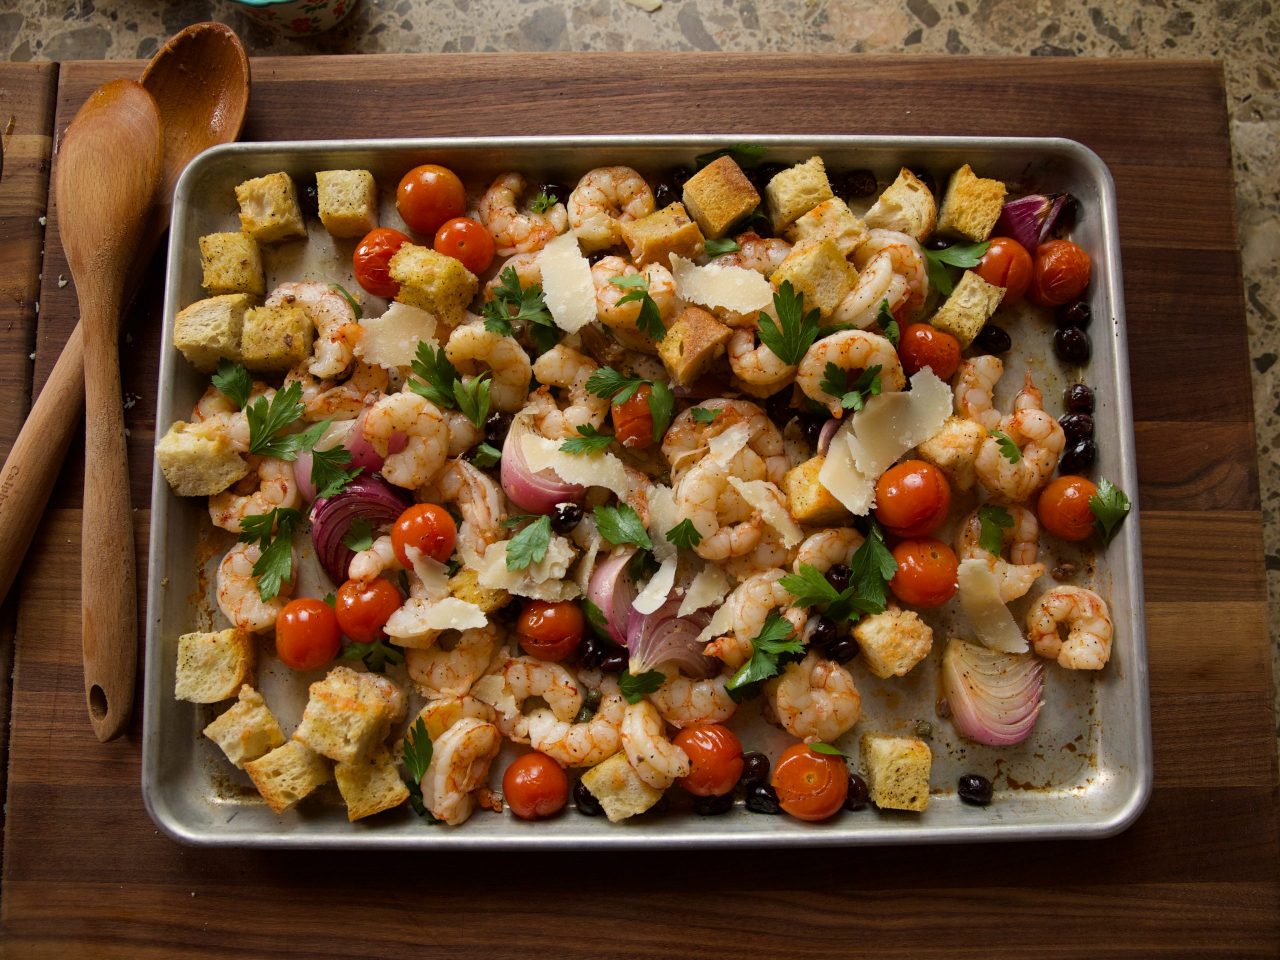 Ree Drummond's Sheet Pan Shrimp Puttanesca, as seen on The Pioneer Woman.